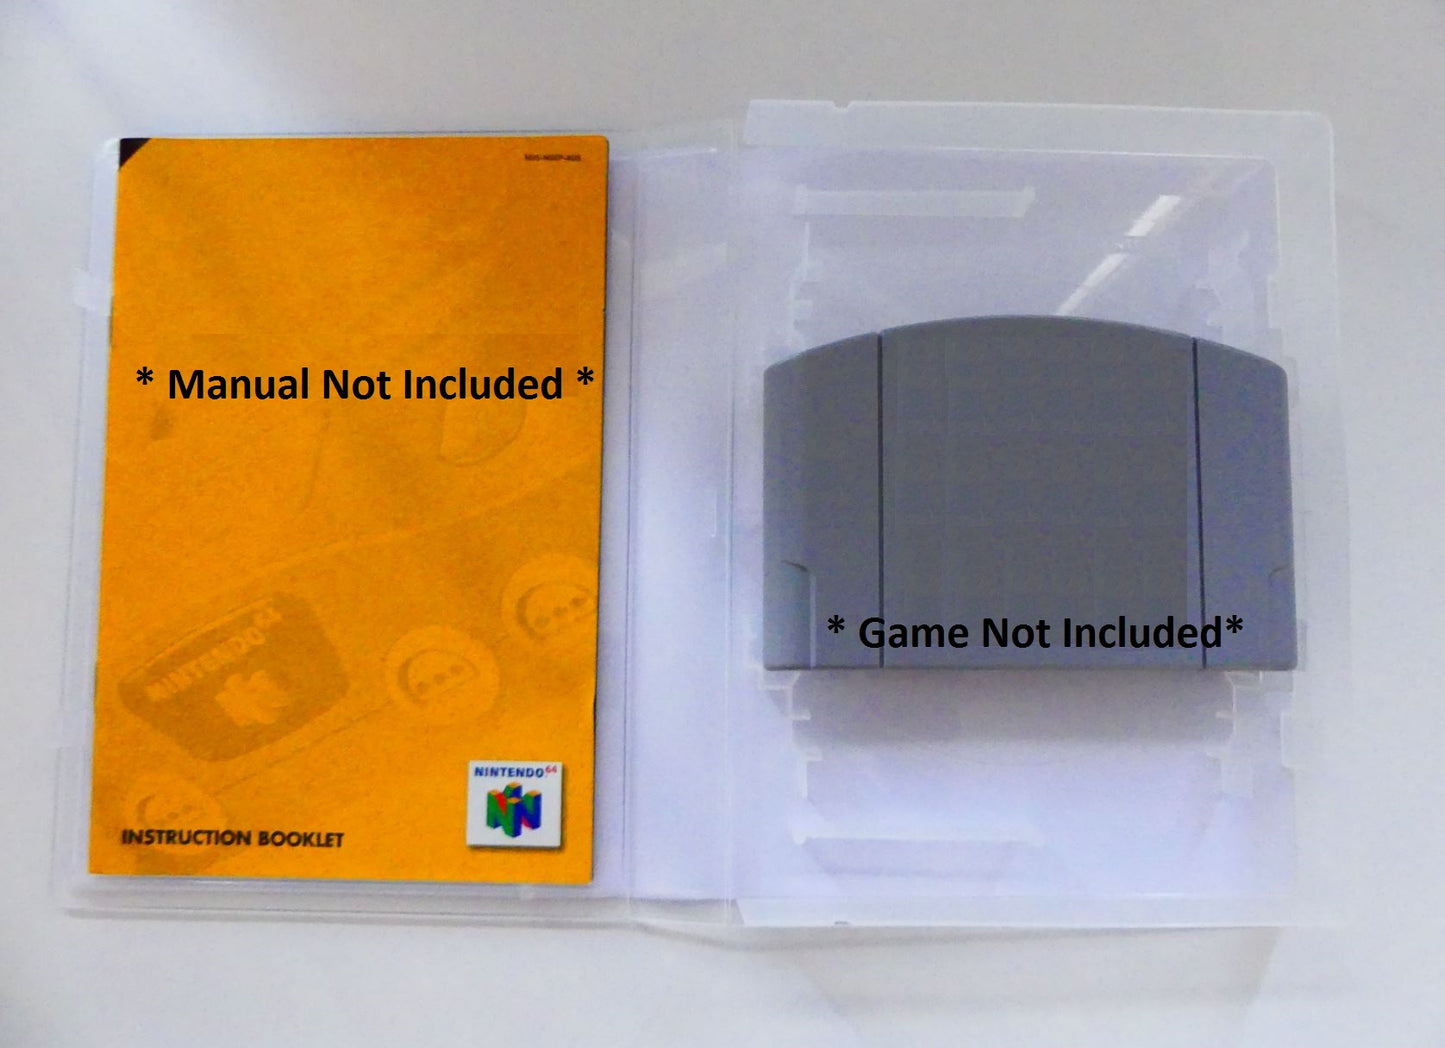 Diddy Kong Racing - N64 Replacement Case